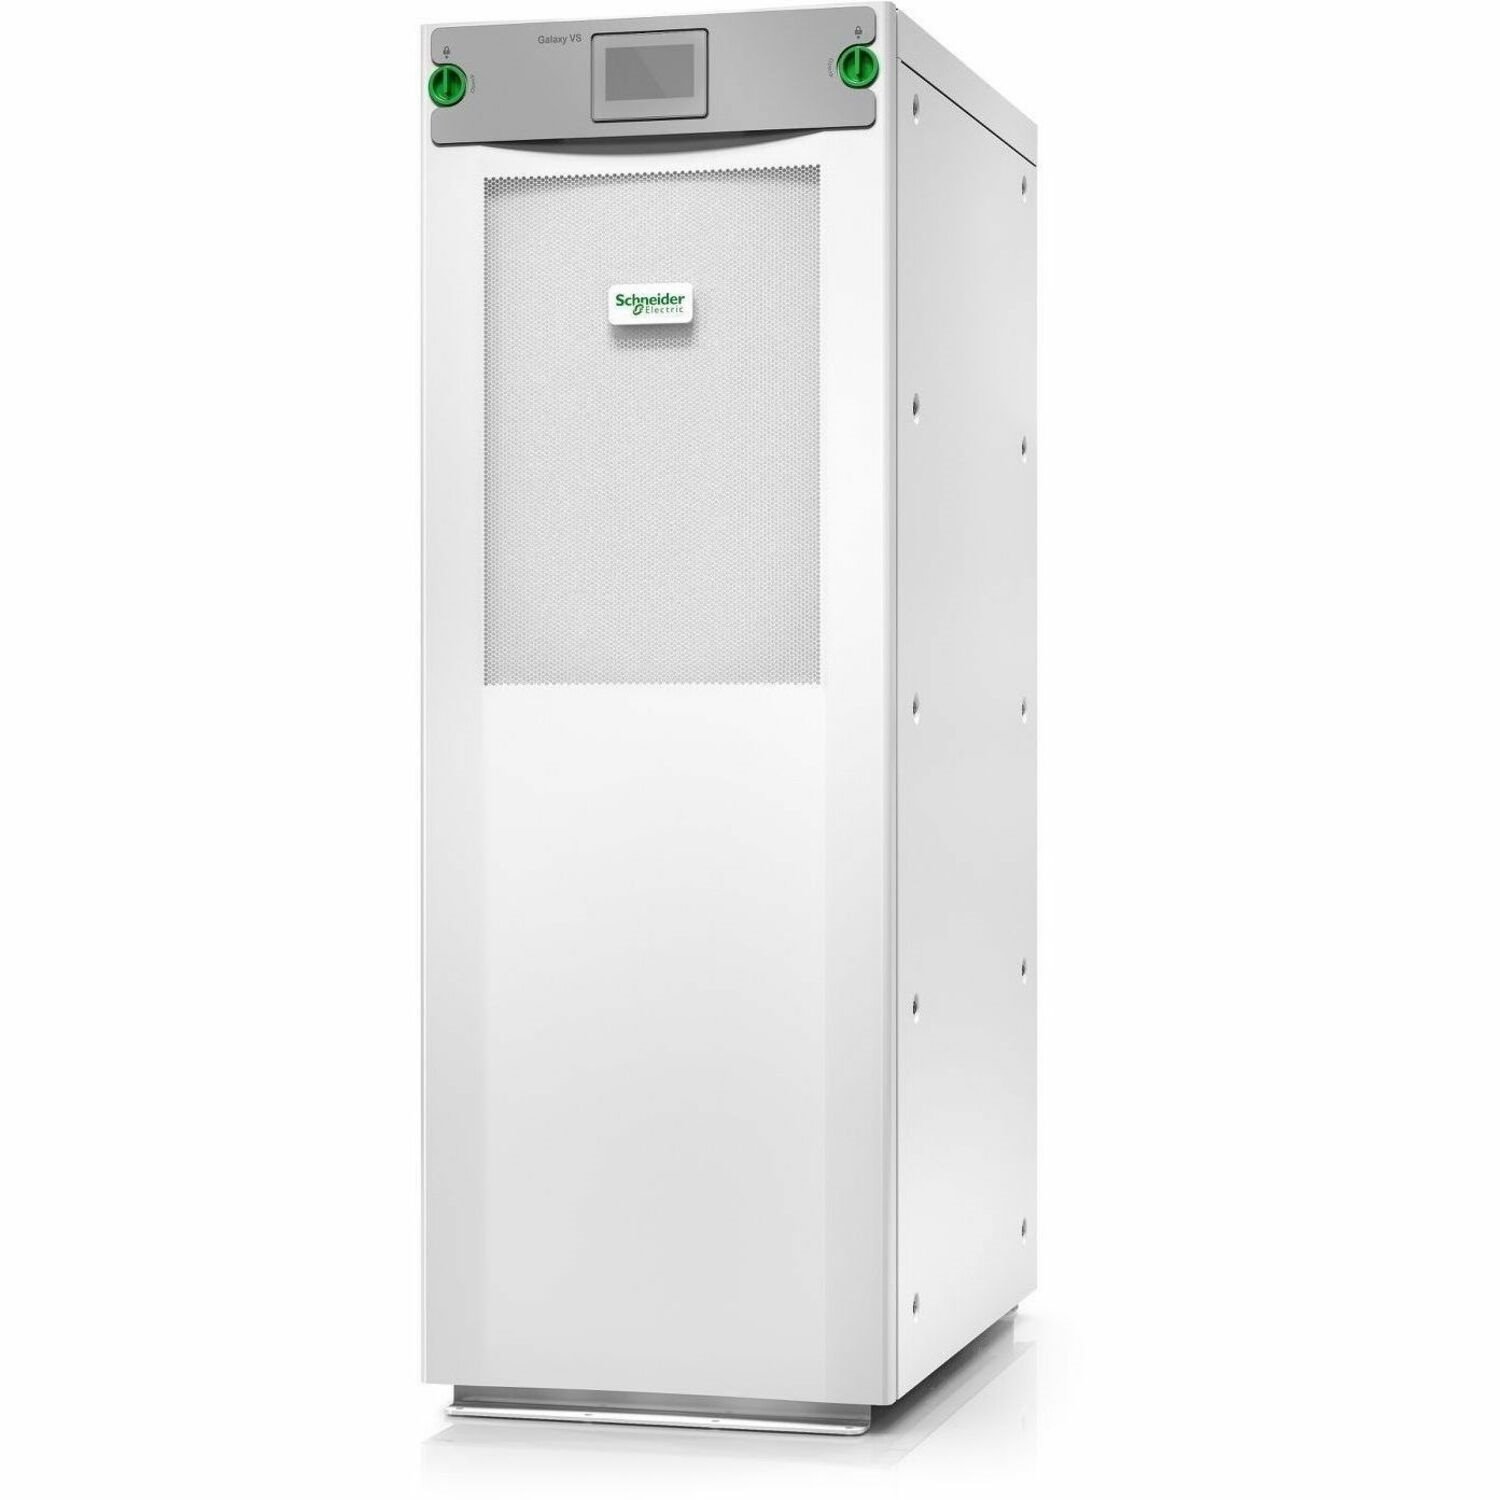 APC by Schneider Electric Galaxy VS Double Conversion Online UPS - 60 kVA/60 kW - Three Phase